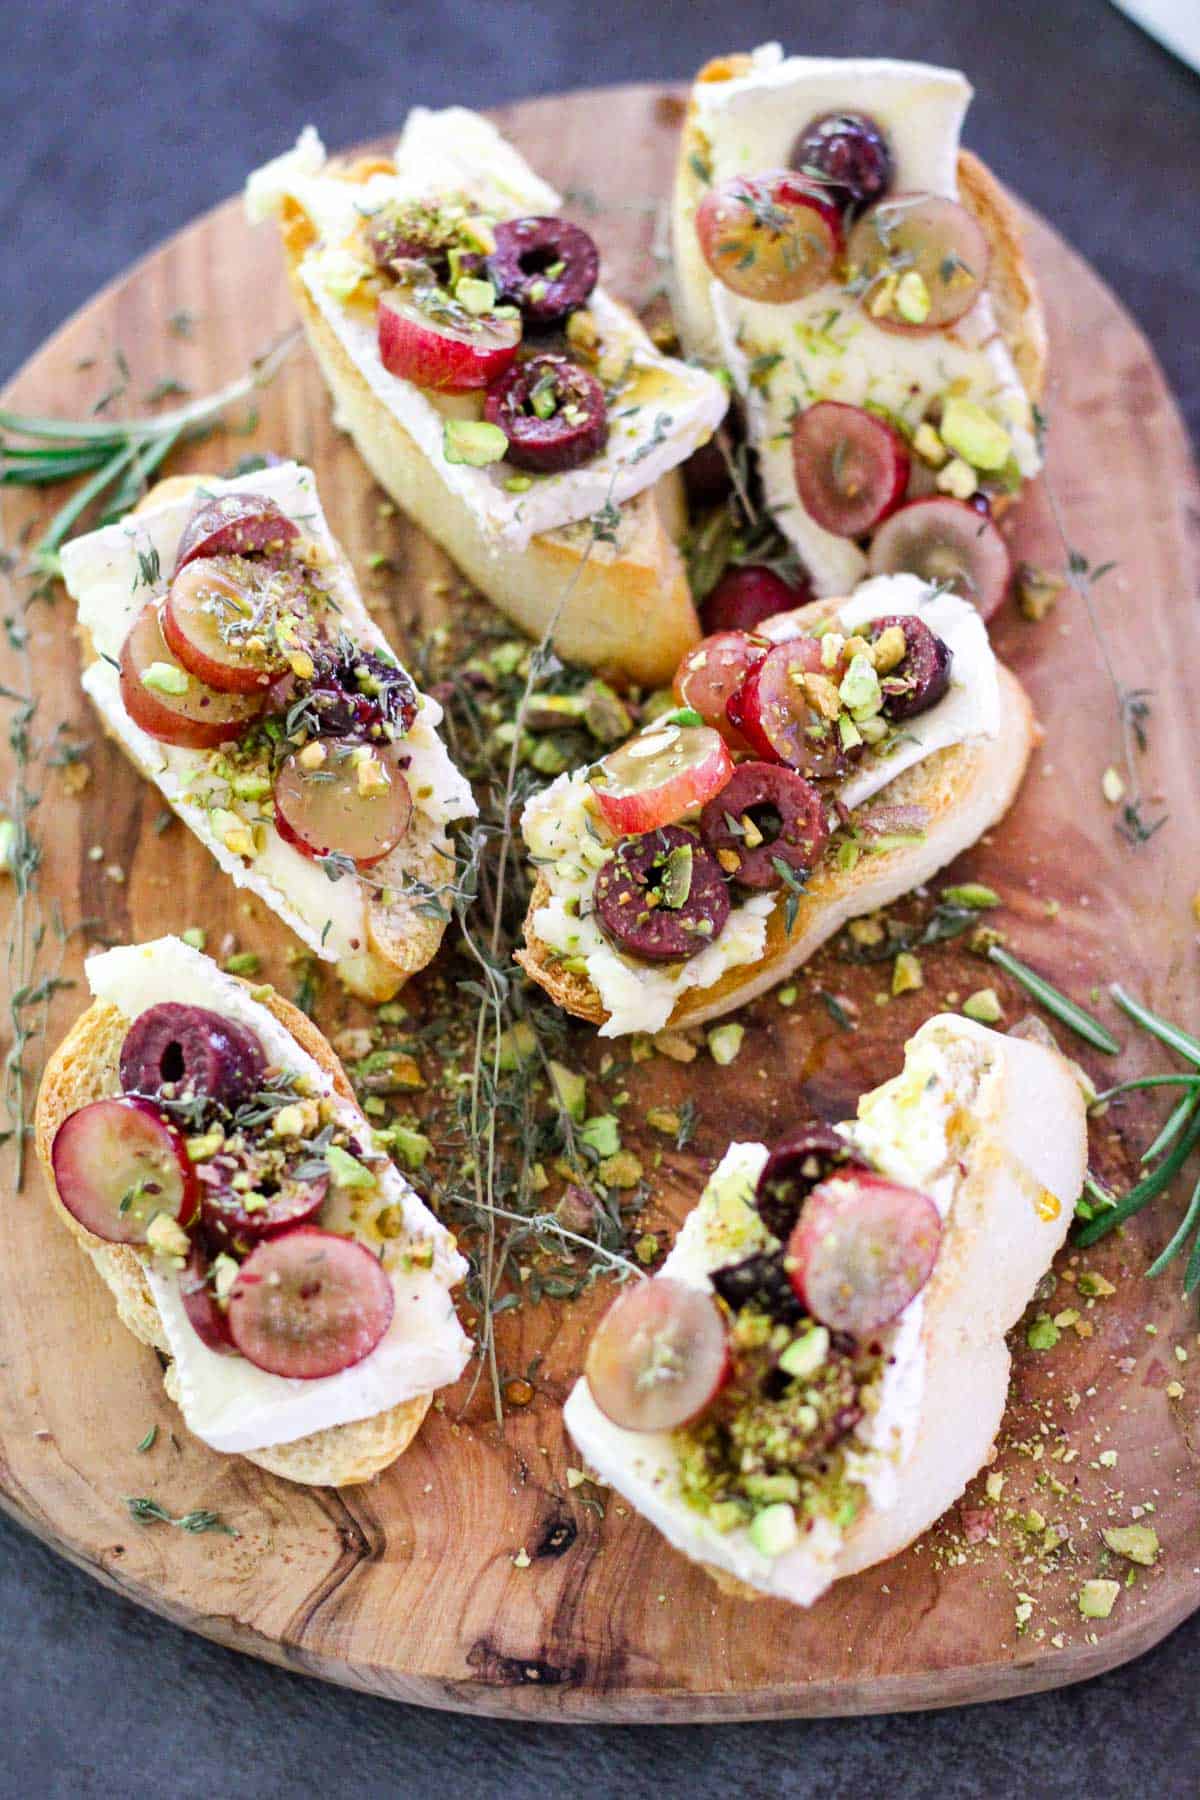 A cheese wood board shown with crostini on top. The bread bites have brie cheese, grapes, olives, pistachios visibly on them and some garnishes with thyme and rosemary.